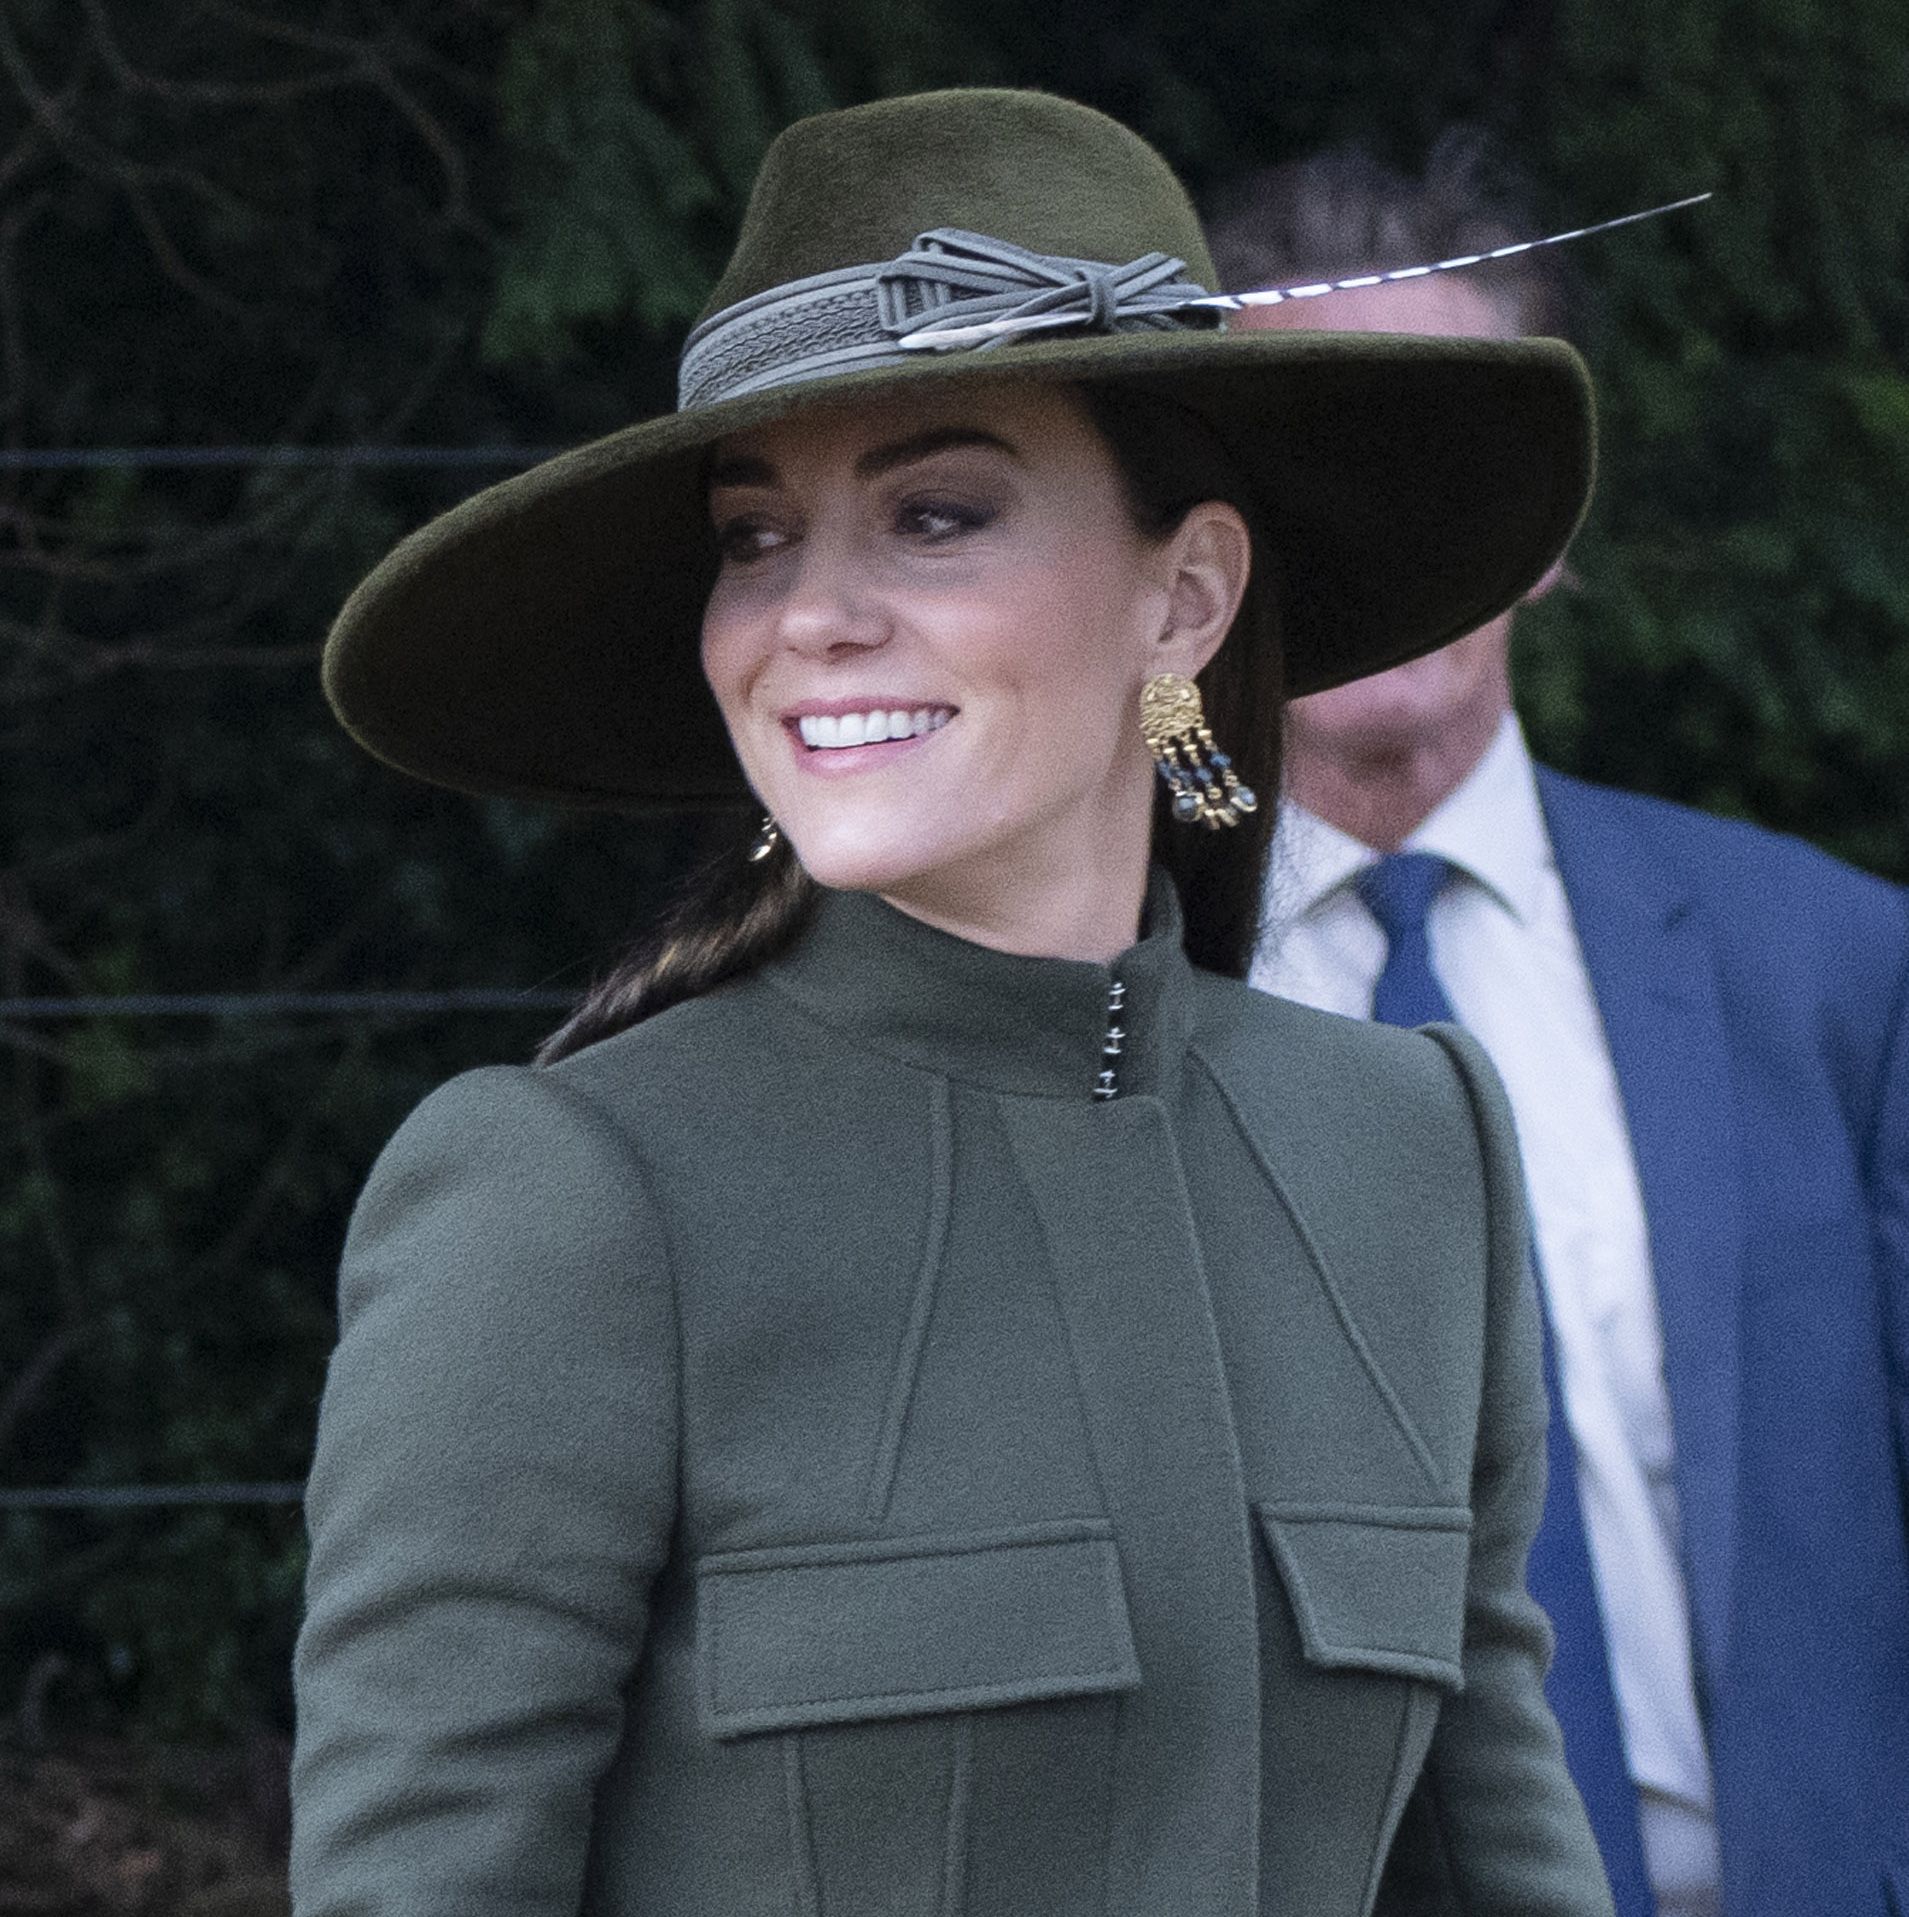 Princess Kate Looks Gorgeous in a Green Coat and Brimmed Hat for Christmas Day